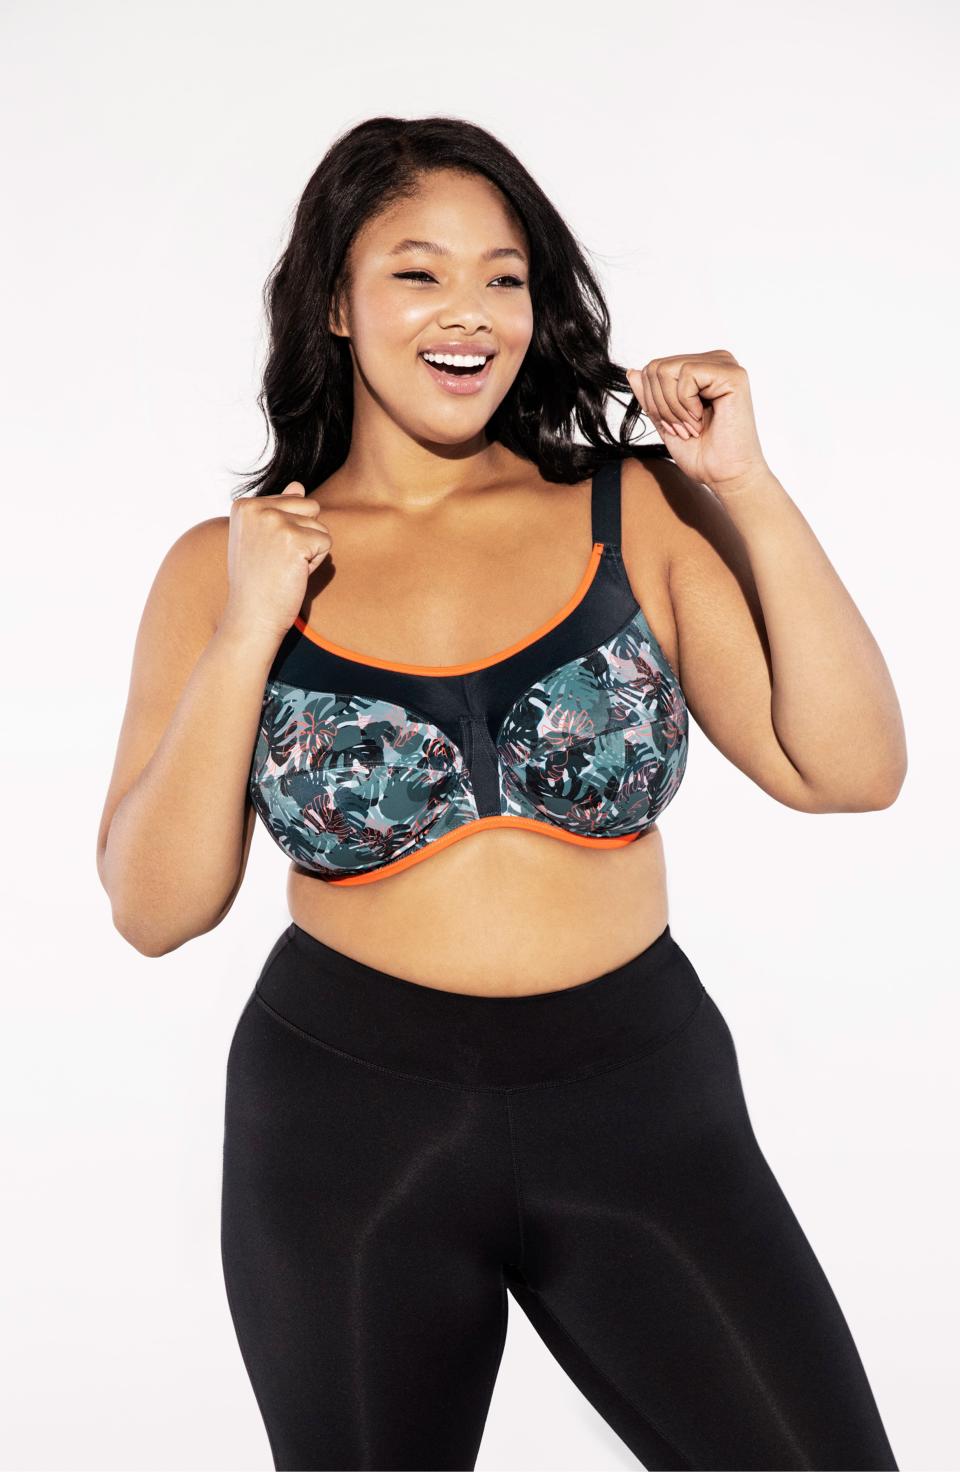 This bra comes in sizes 32G to 44G. <a href="https://fave.co/2RRi8i6" target="_blank" rel="noopener noreferrer">Get it for $68 at Nordstrom</a>.